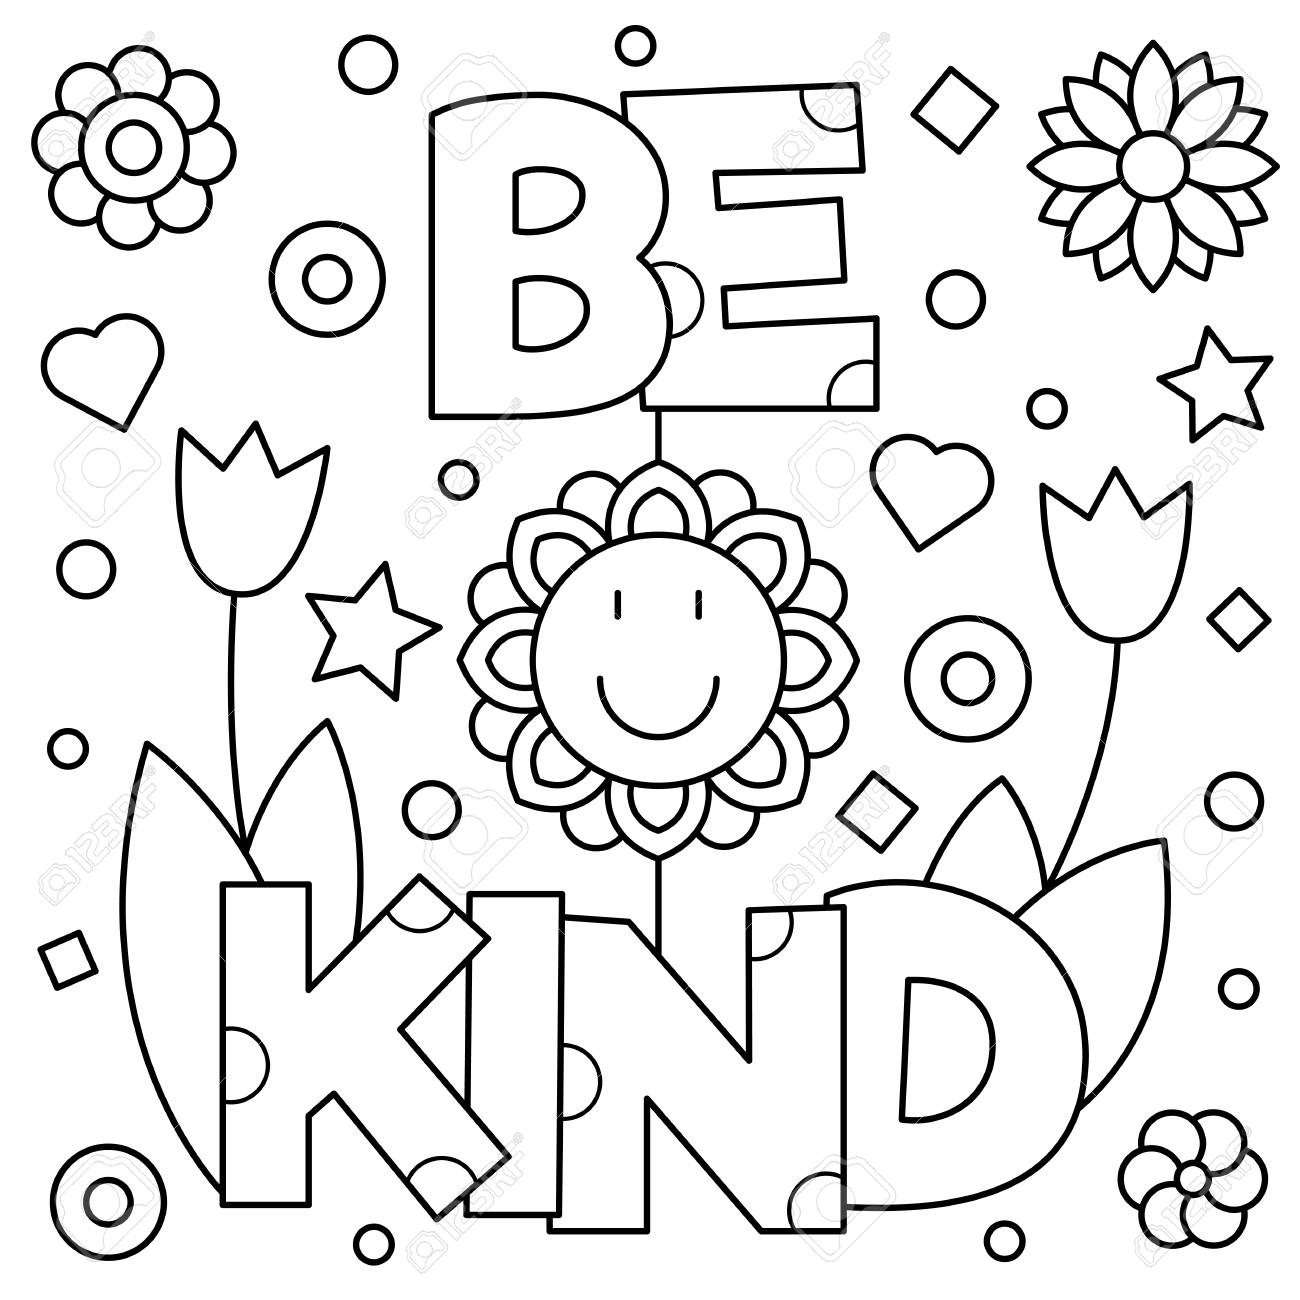 be-kind-coloring-page-at-getdrawings-free-download